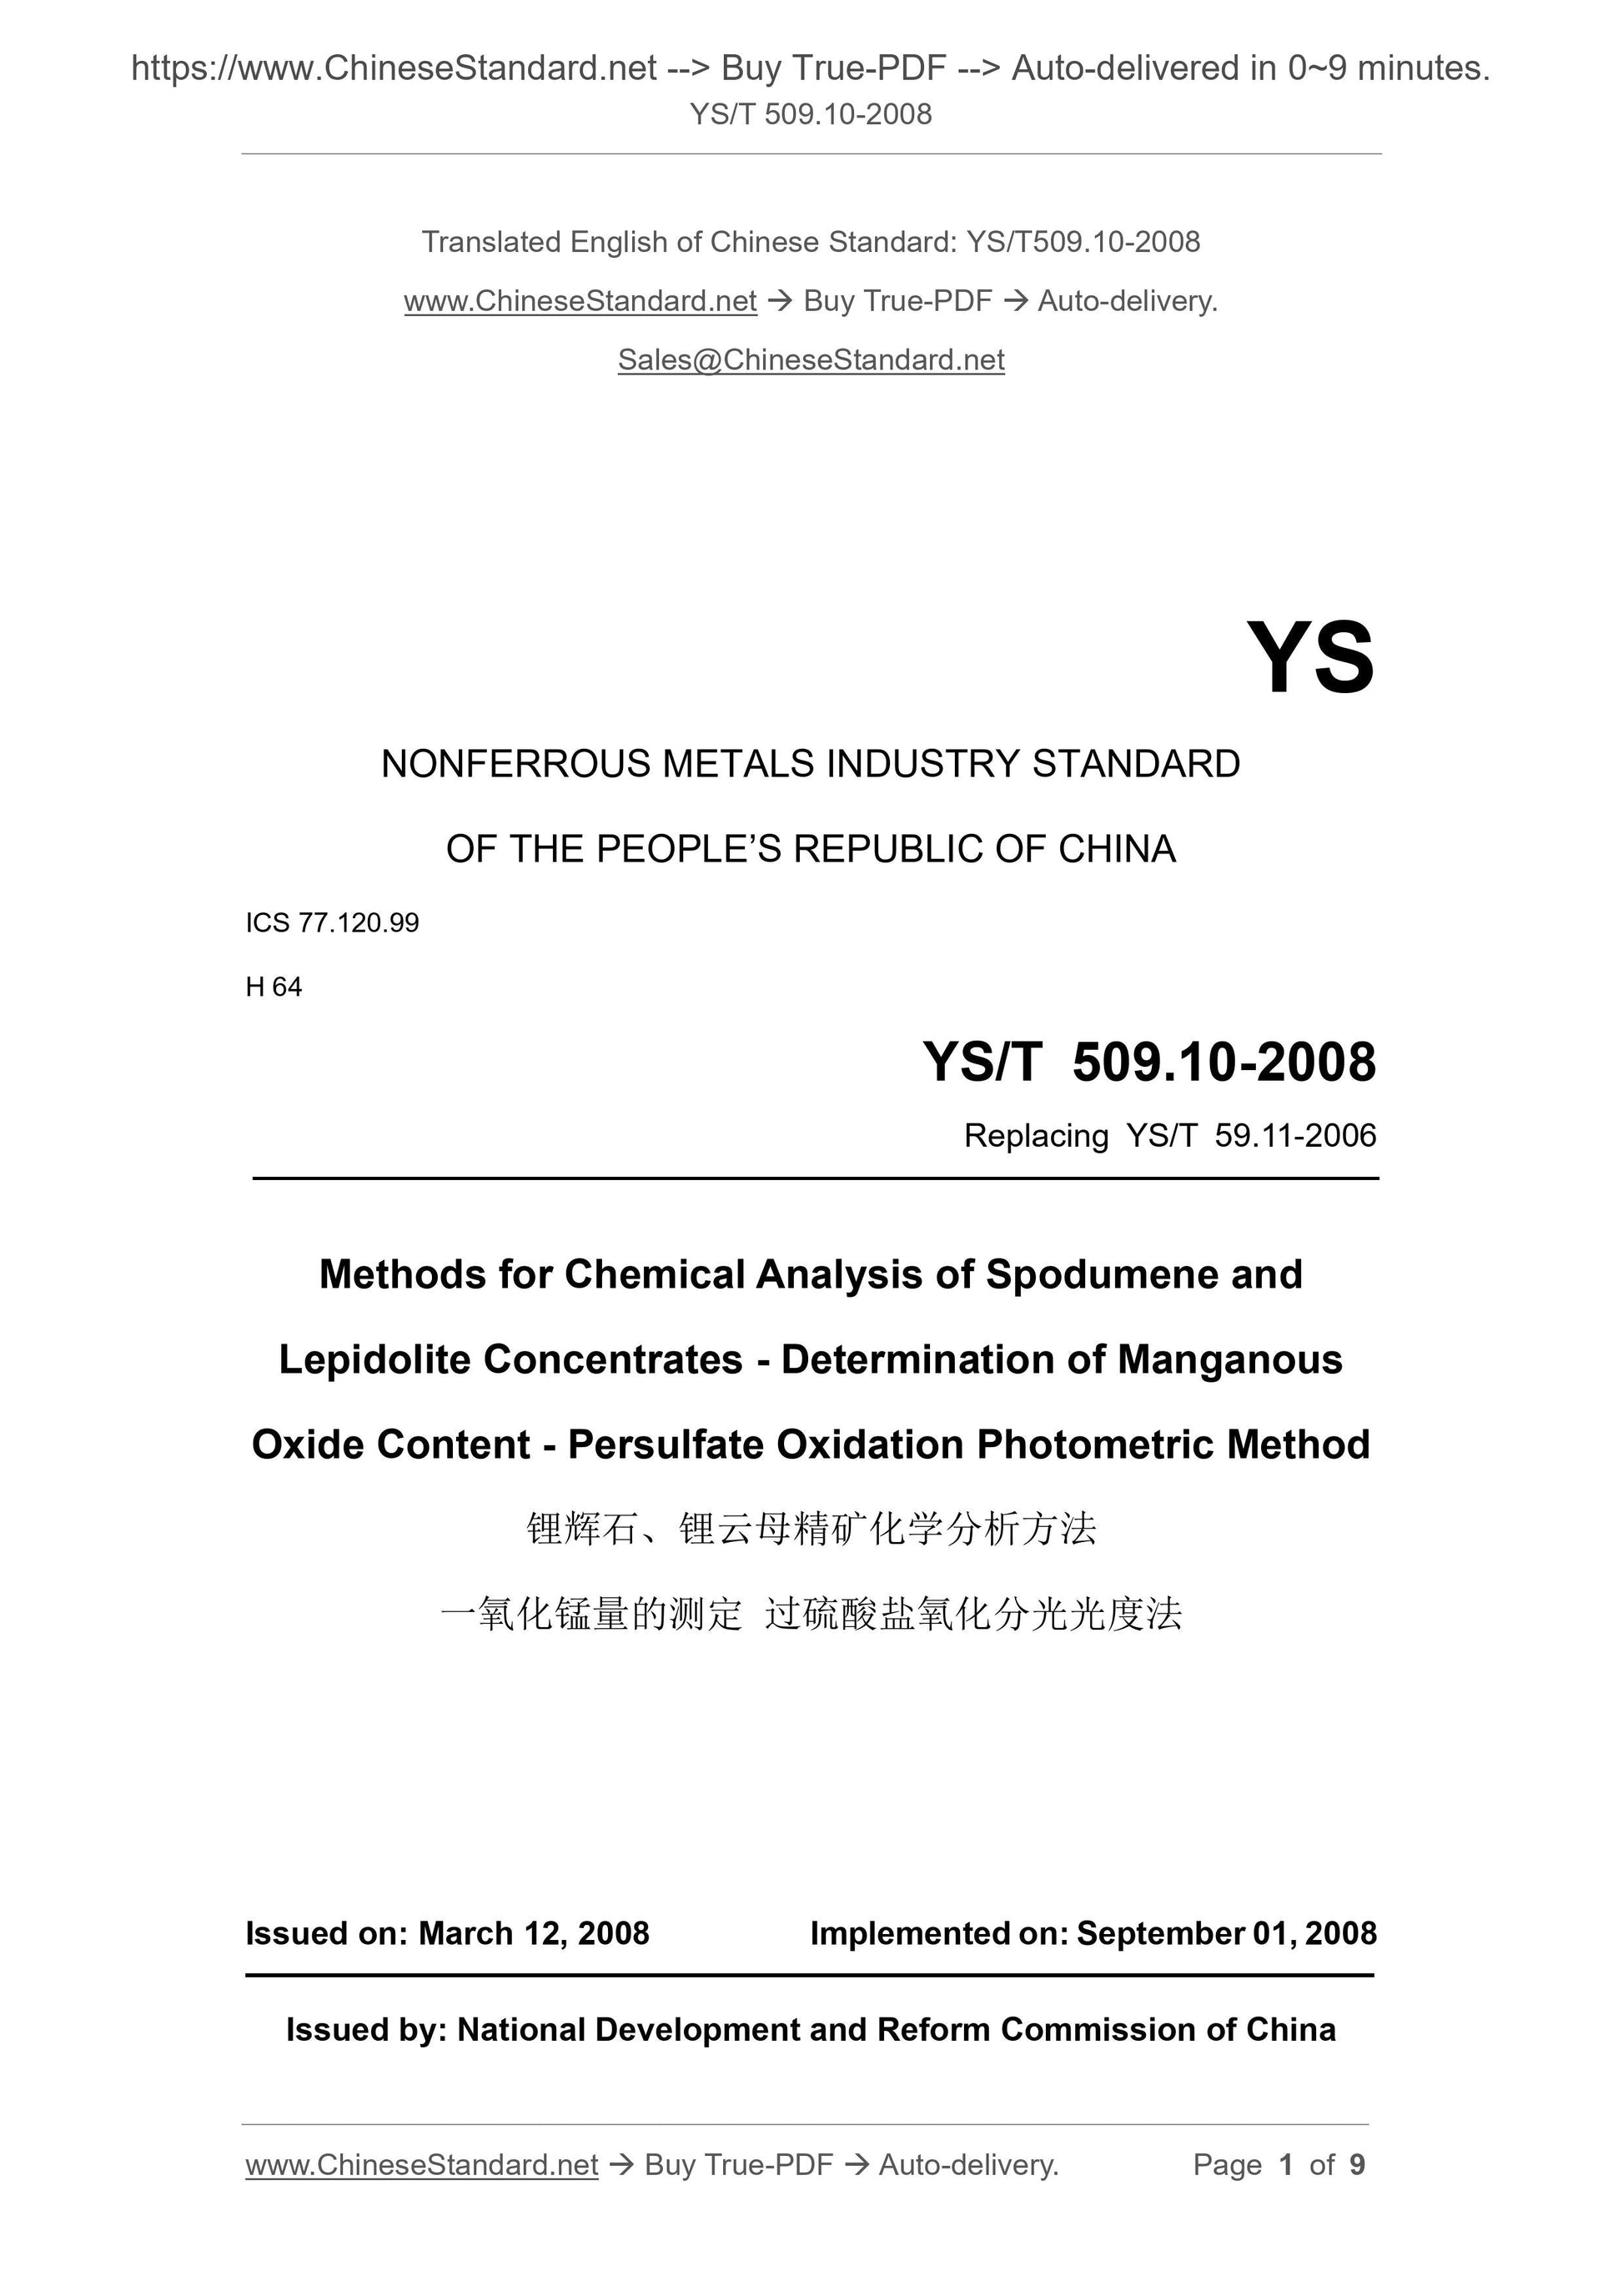 YS/T 509.10-2008 Page 1